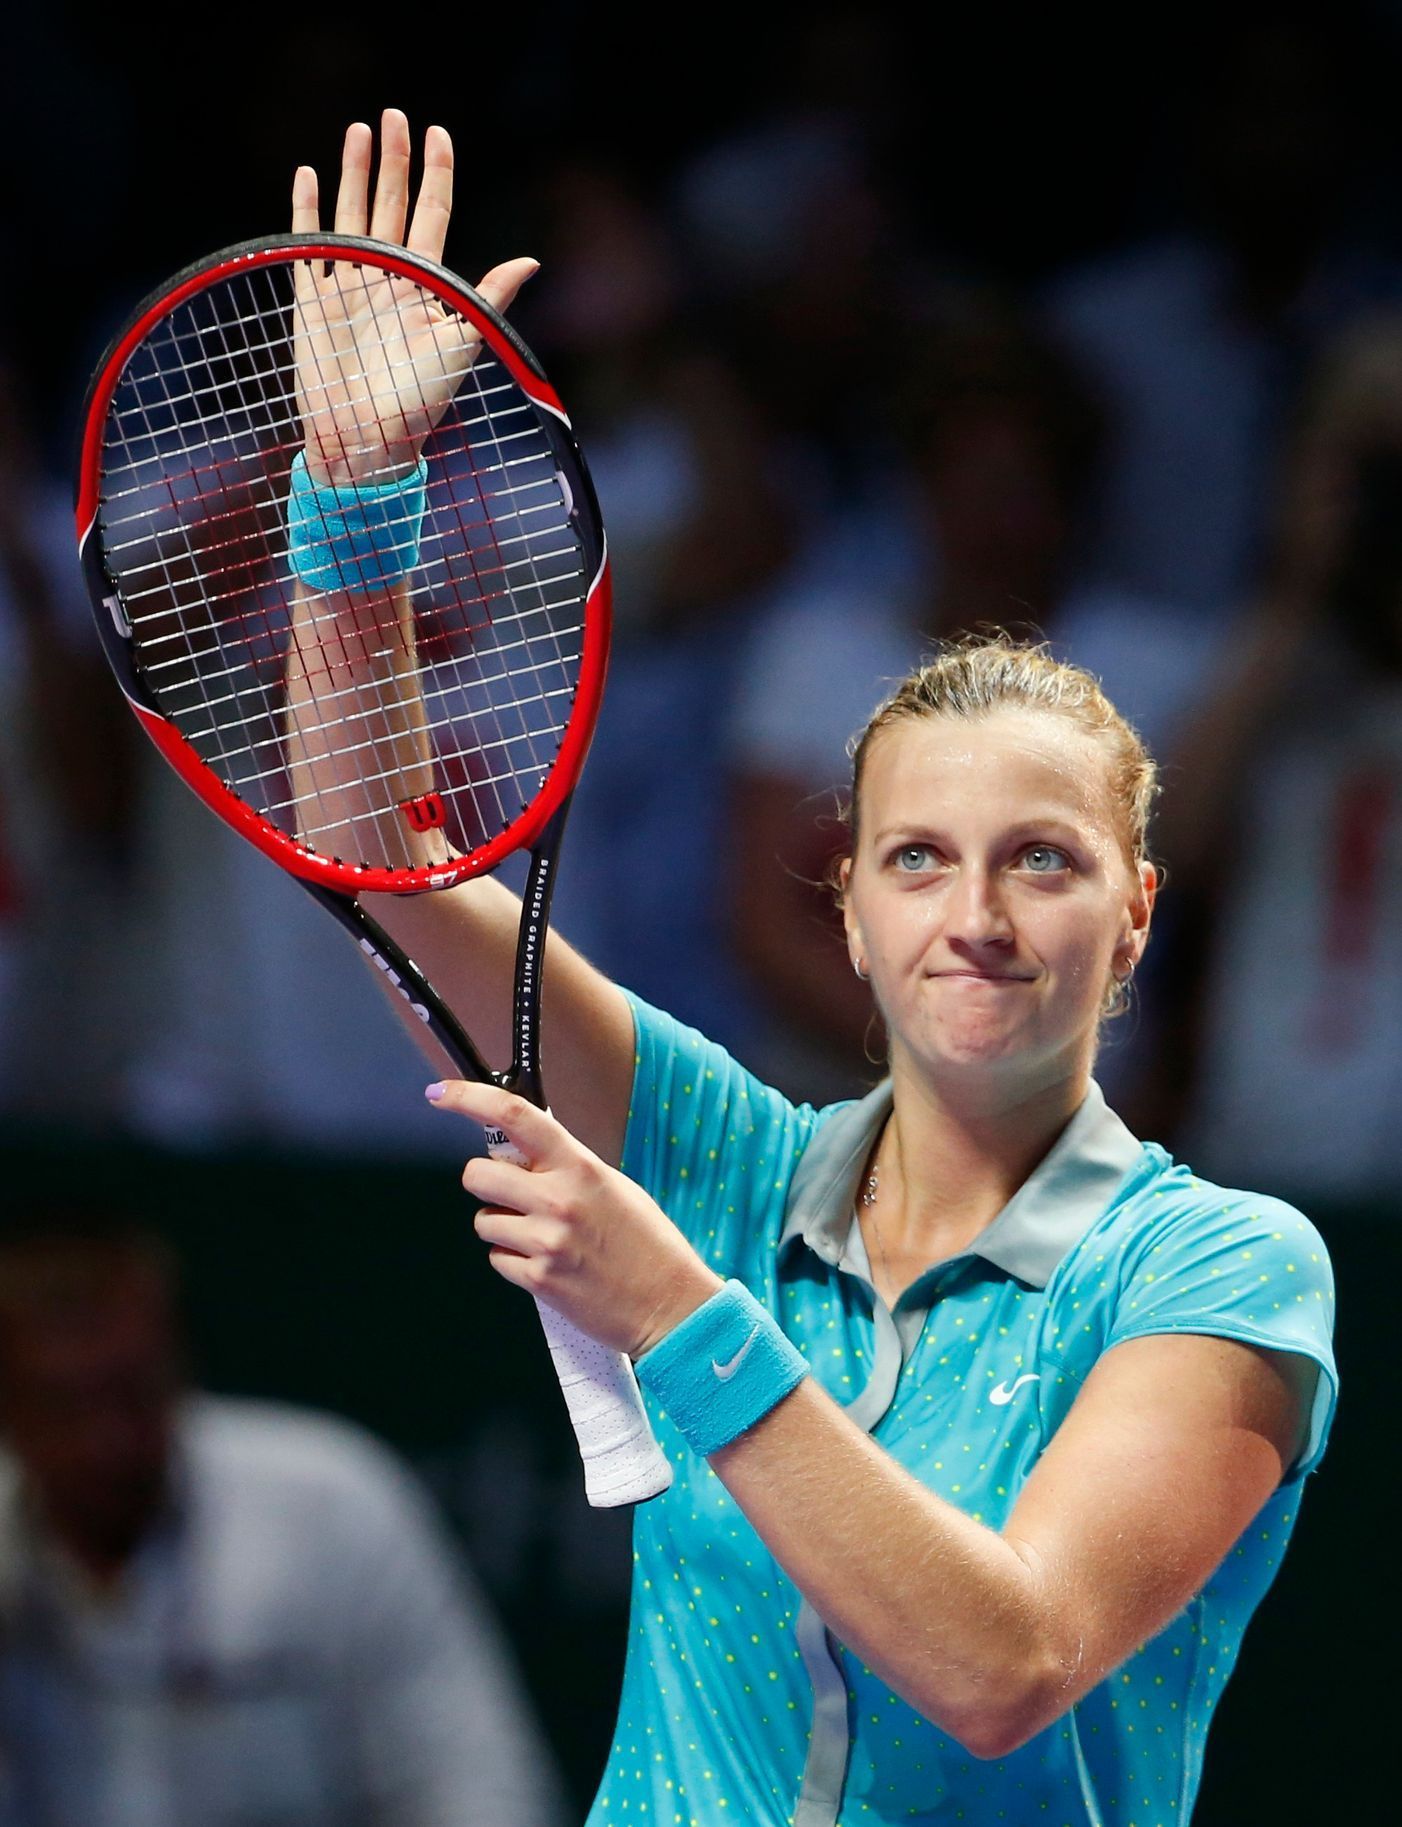 Petra Kvitova of the Czech Republic acknowledges the audience after defeating Maria Sharapova of Russia during their WTA Finals singles tennis match at the Singapore Indoor Stadium